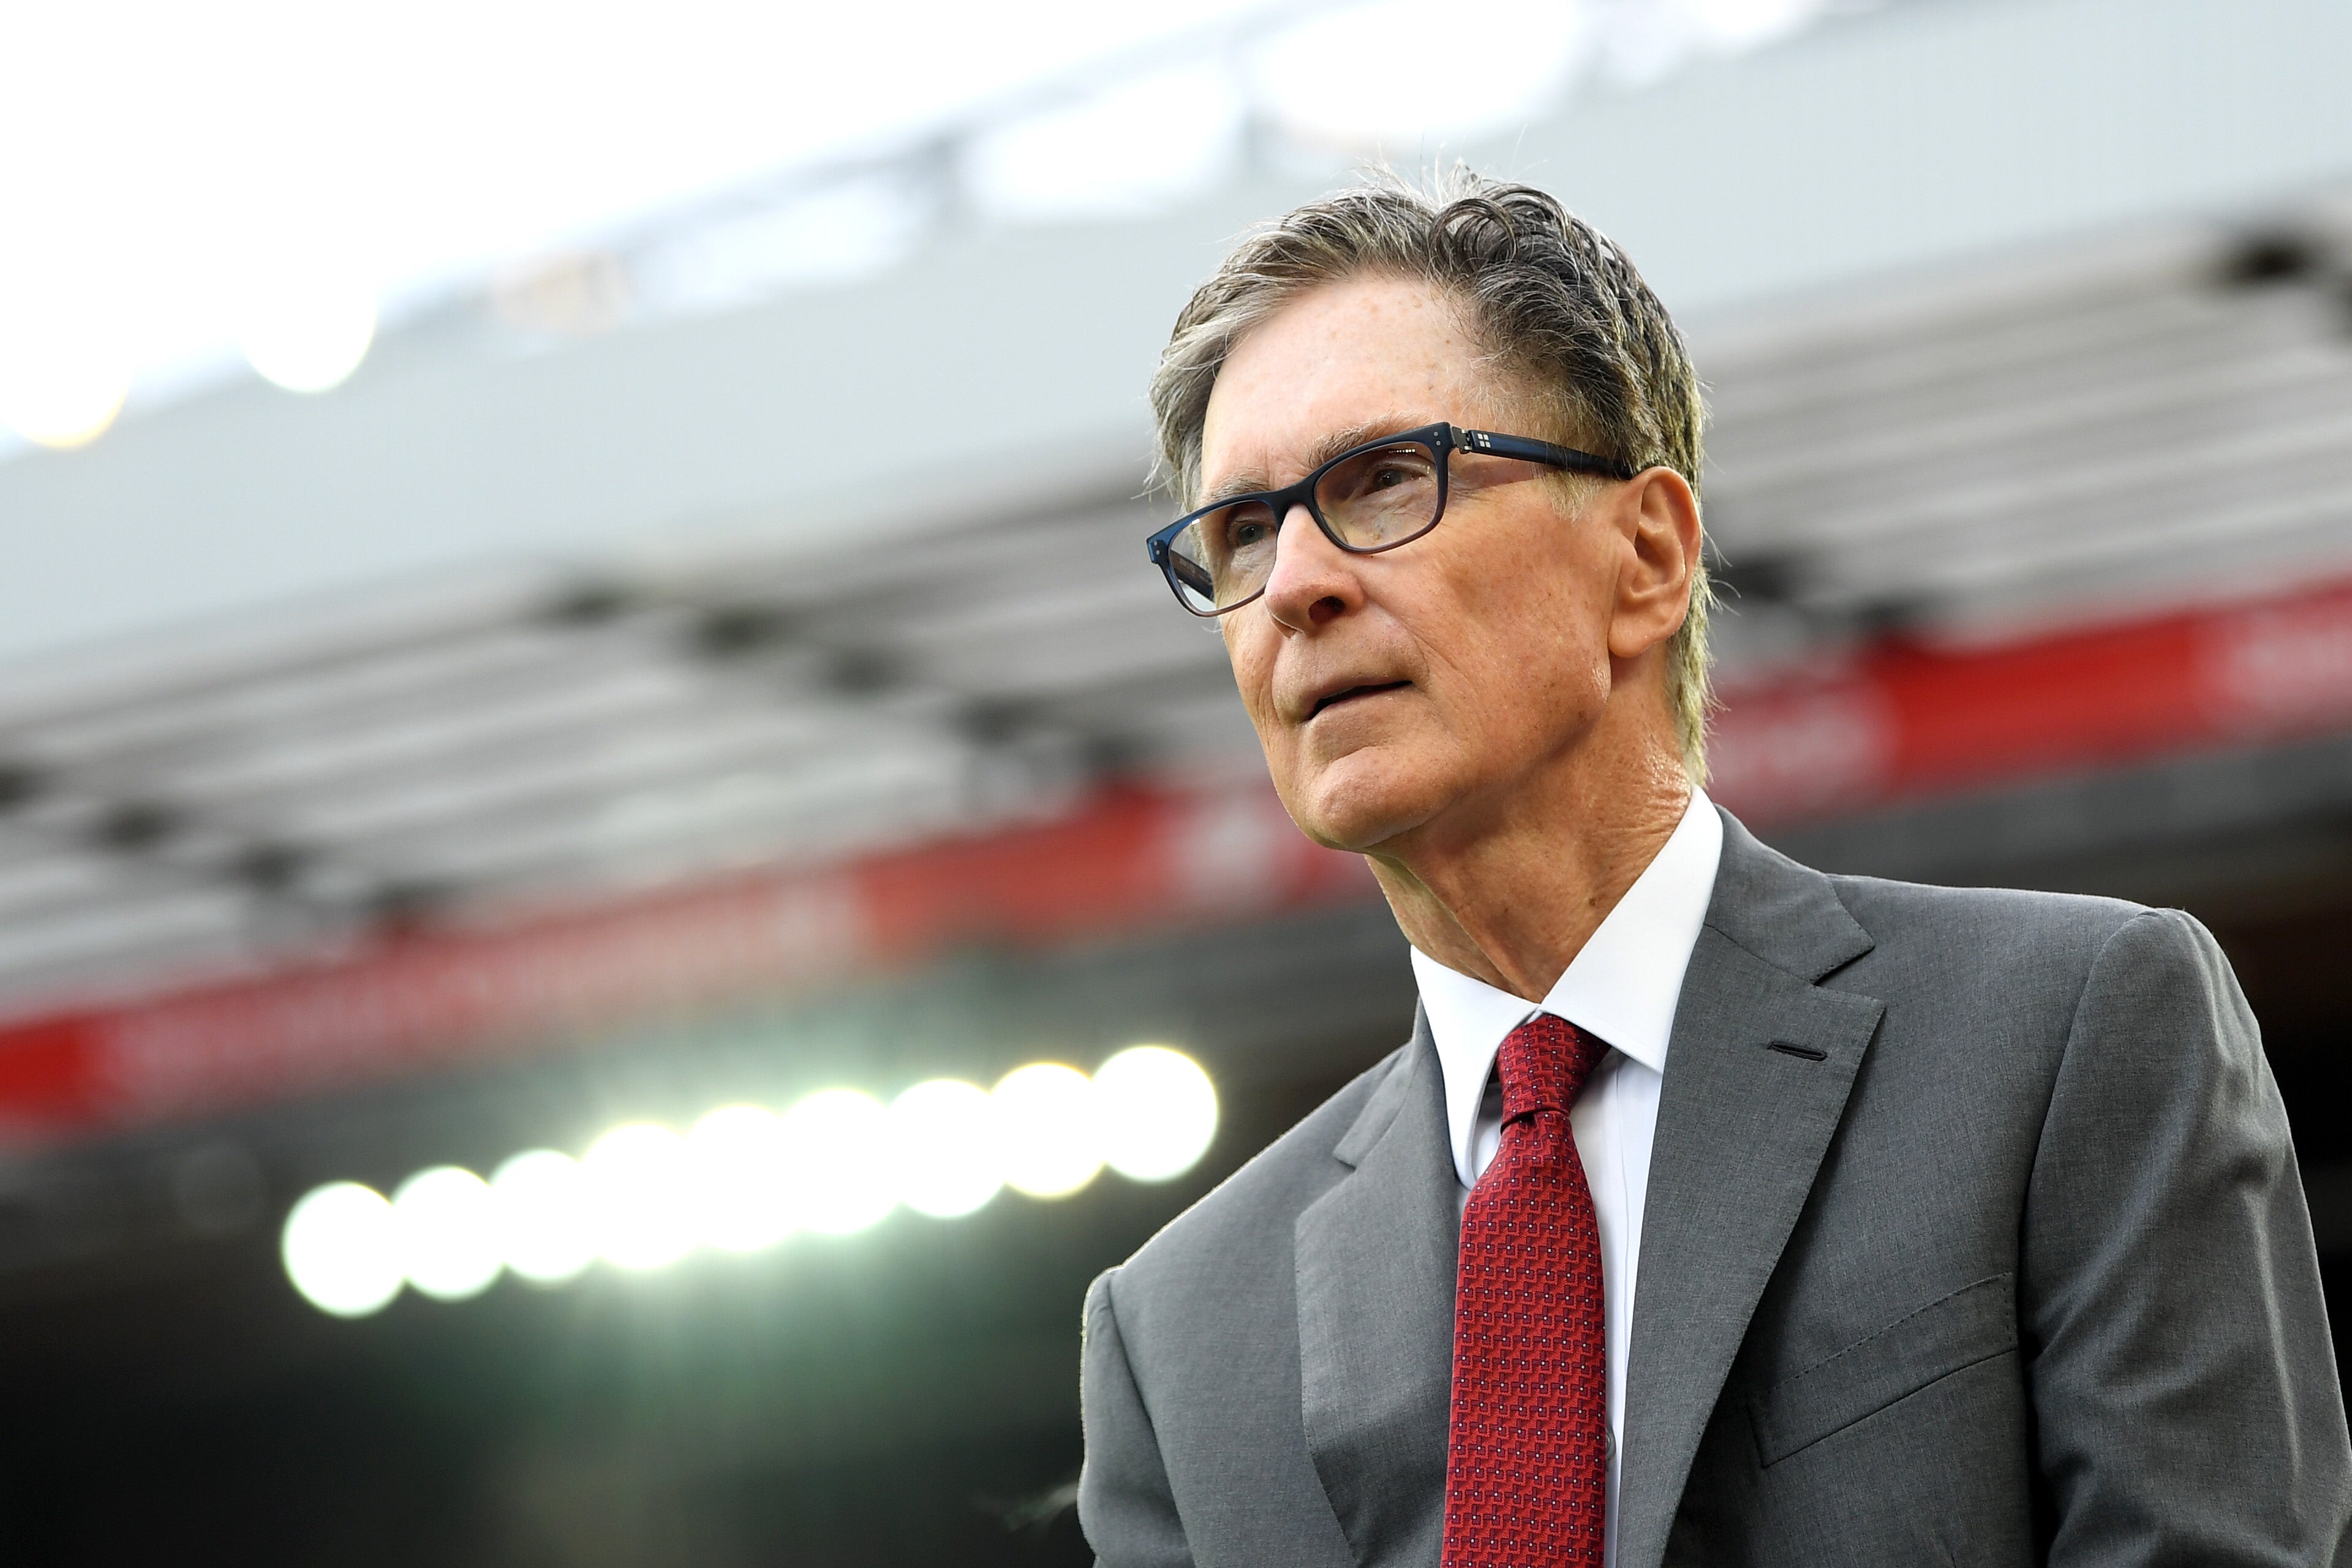 John W Henry has overseen an efficient transfer strategy at Liverpool